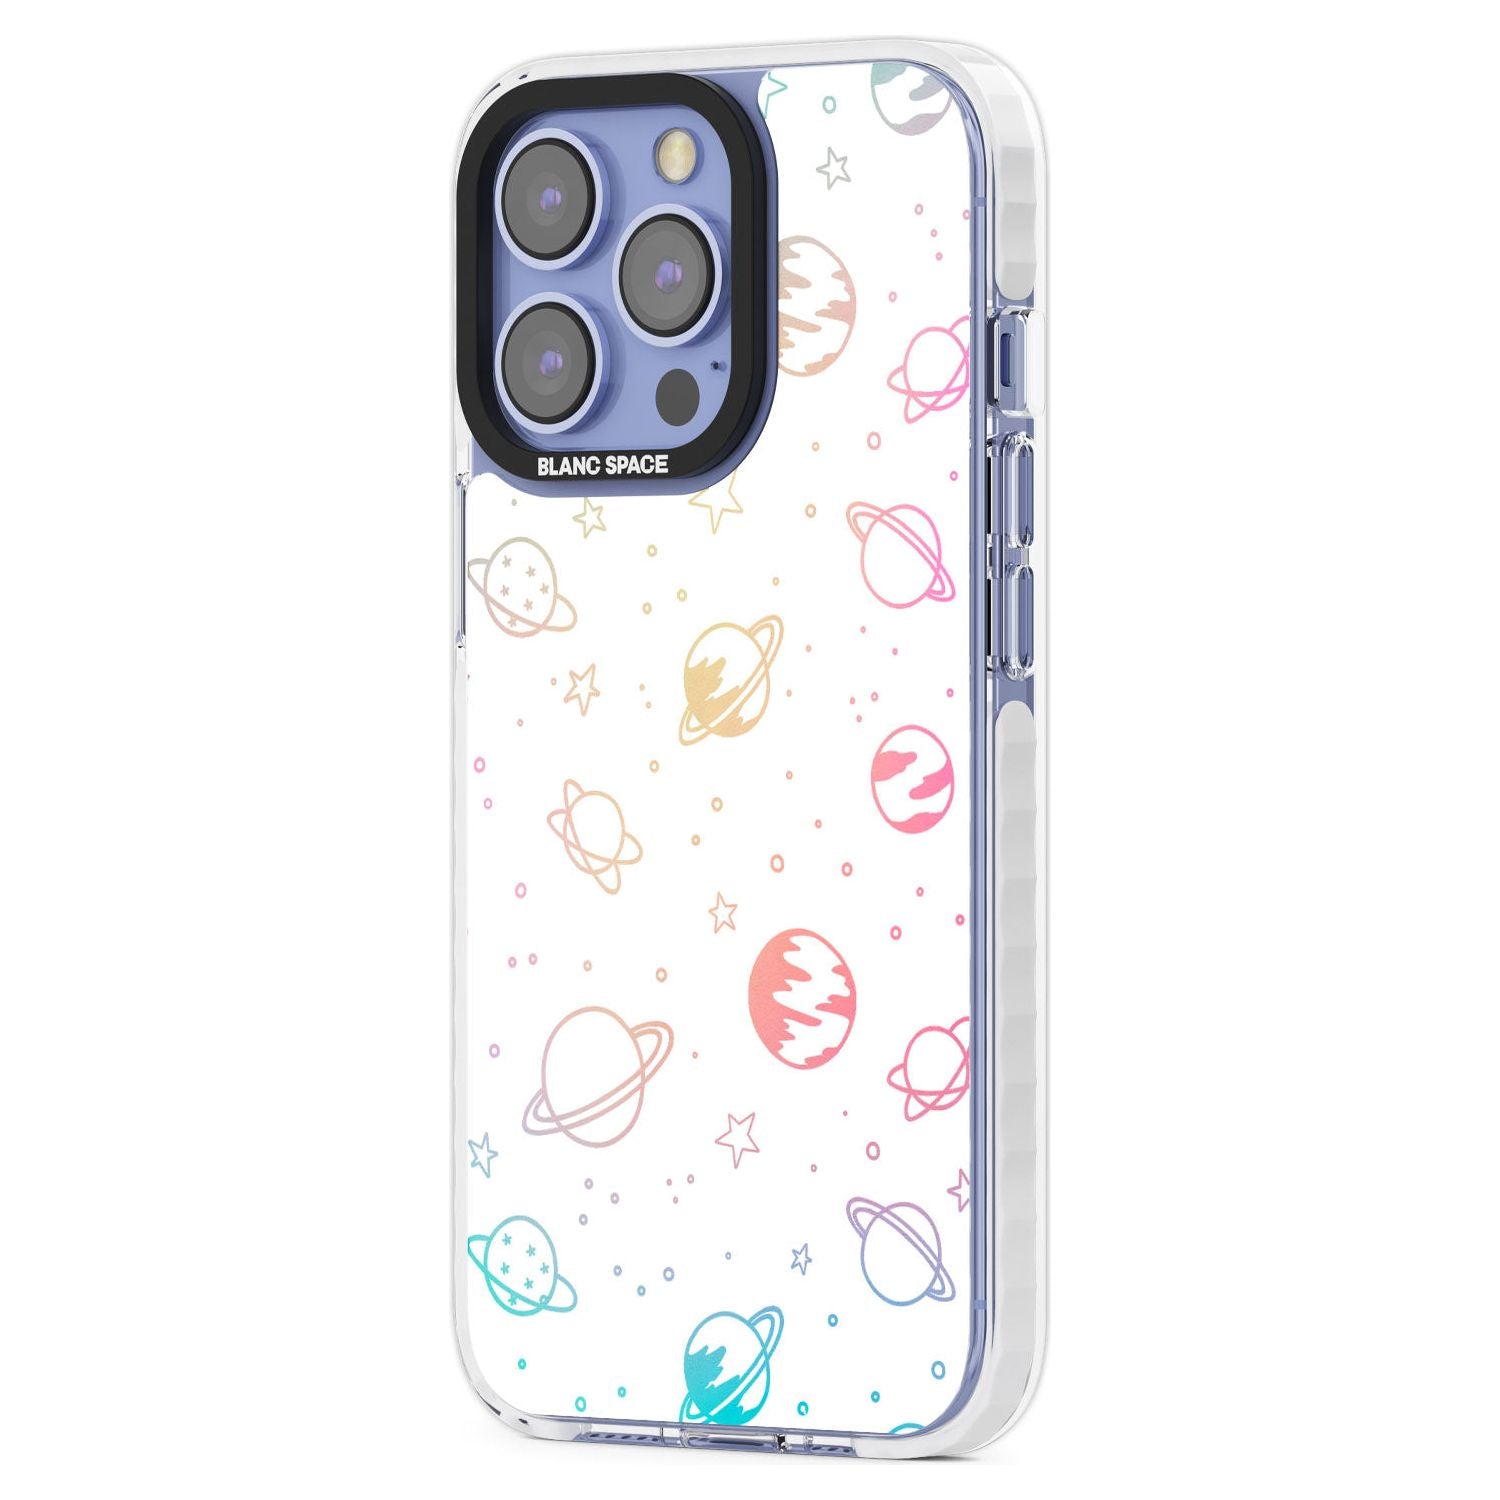 Cosmic Outer Space Design Pastels on White Phone Case iPhone 15 Pro Max / Black Impact Case,iPhone 15 Plus / Black Impact Case,iPhone 15 Pro / Black Impact Case,iPhone 15 / Black Impact Case,iPhone 15 Pro Max / Impact Case,iPhone 15 Plus / Impact Case,iPhone 15 Pro / Impact Case,iPhone 15 / Impact Case,iPhone 15 Pro Max / Magsafe Black Impact Case,iPhone 15 Plus / Magsafe Black Impact Case,iPhone 15 Pro / Magsafe Black Impact Case,iPhone 15 / Magsafe Black Impact Case,iPhone 14 Pro Max / Black Impact Case,i